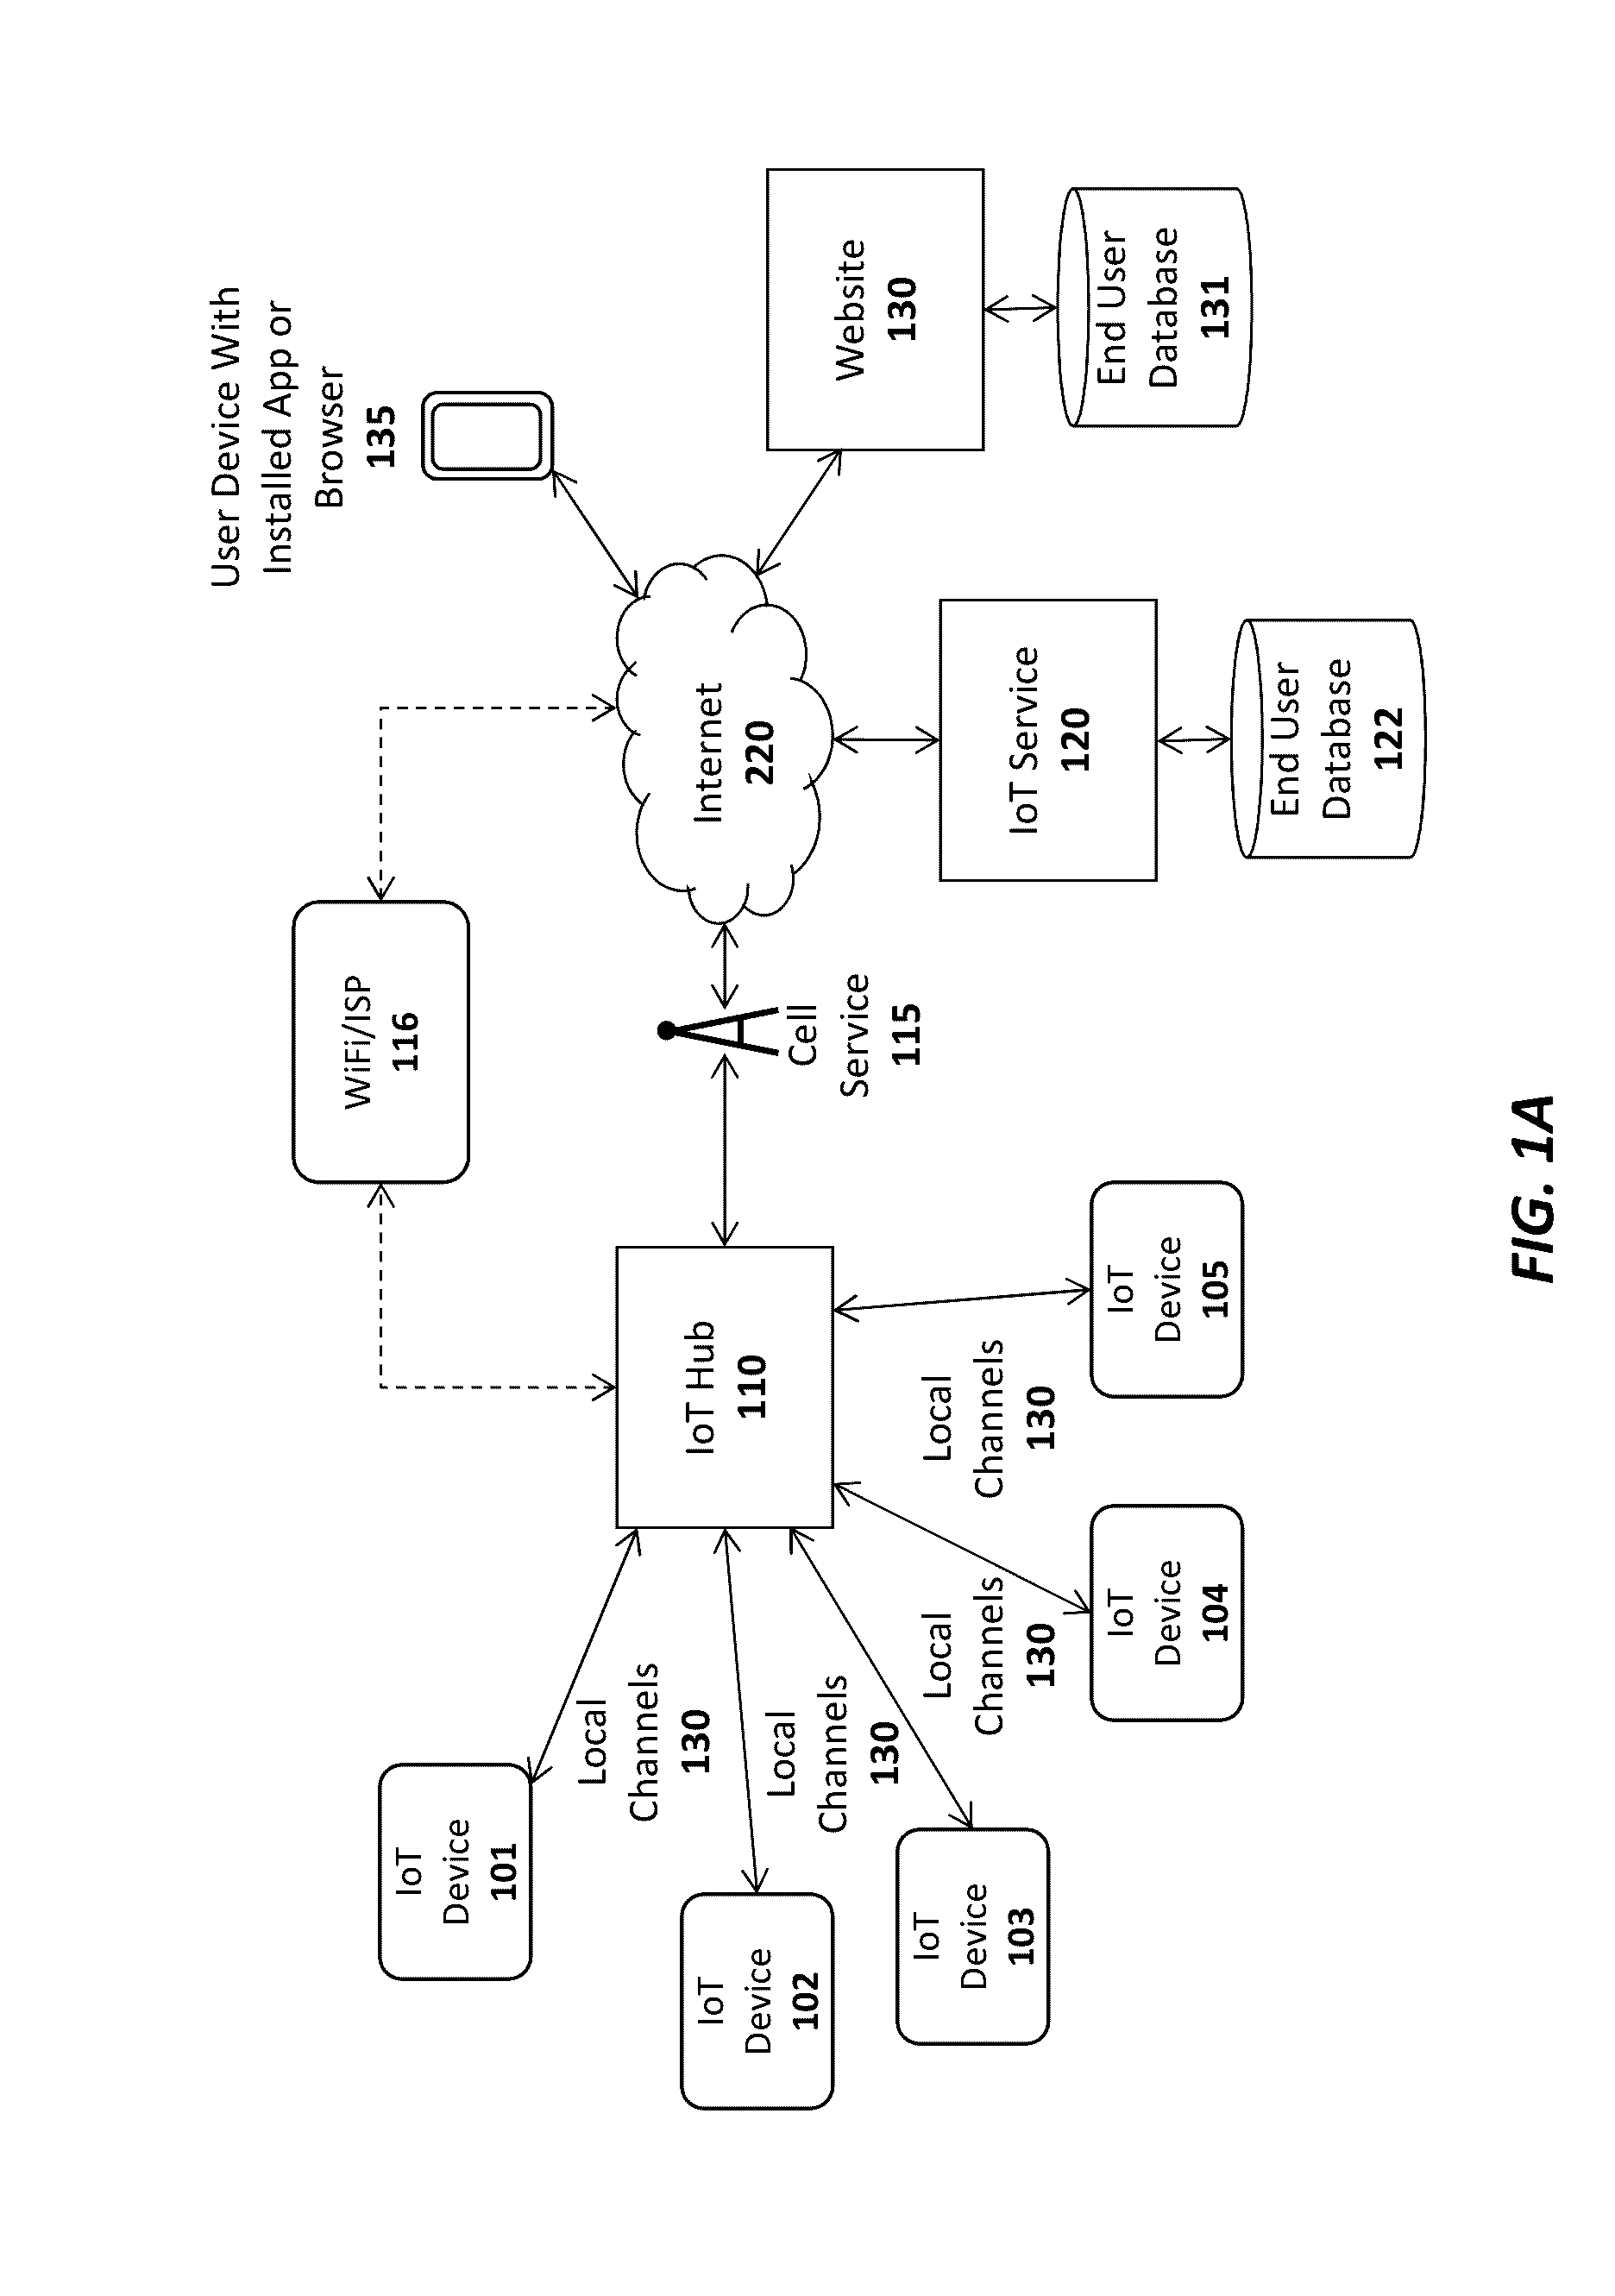 Apparatus and method for accurate barcode scanning using dynamic timing feedback